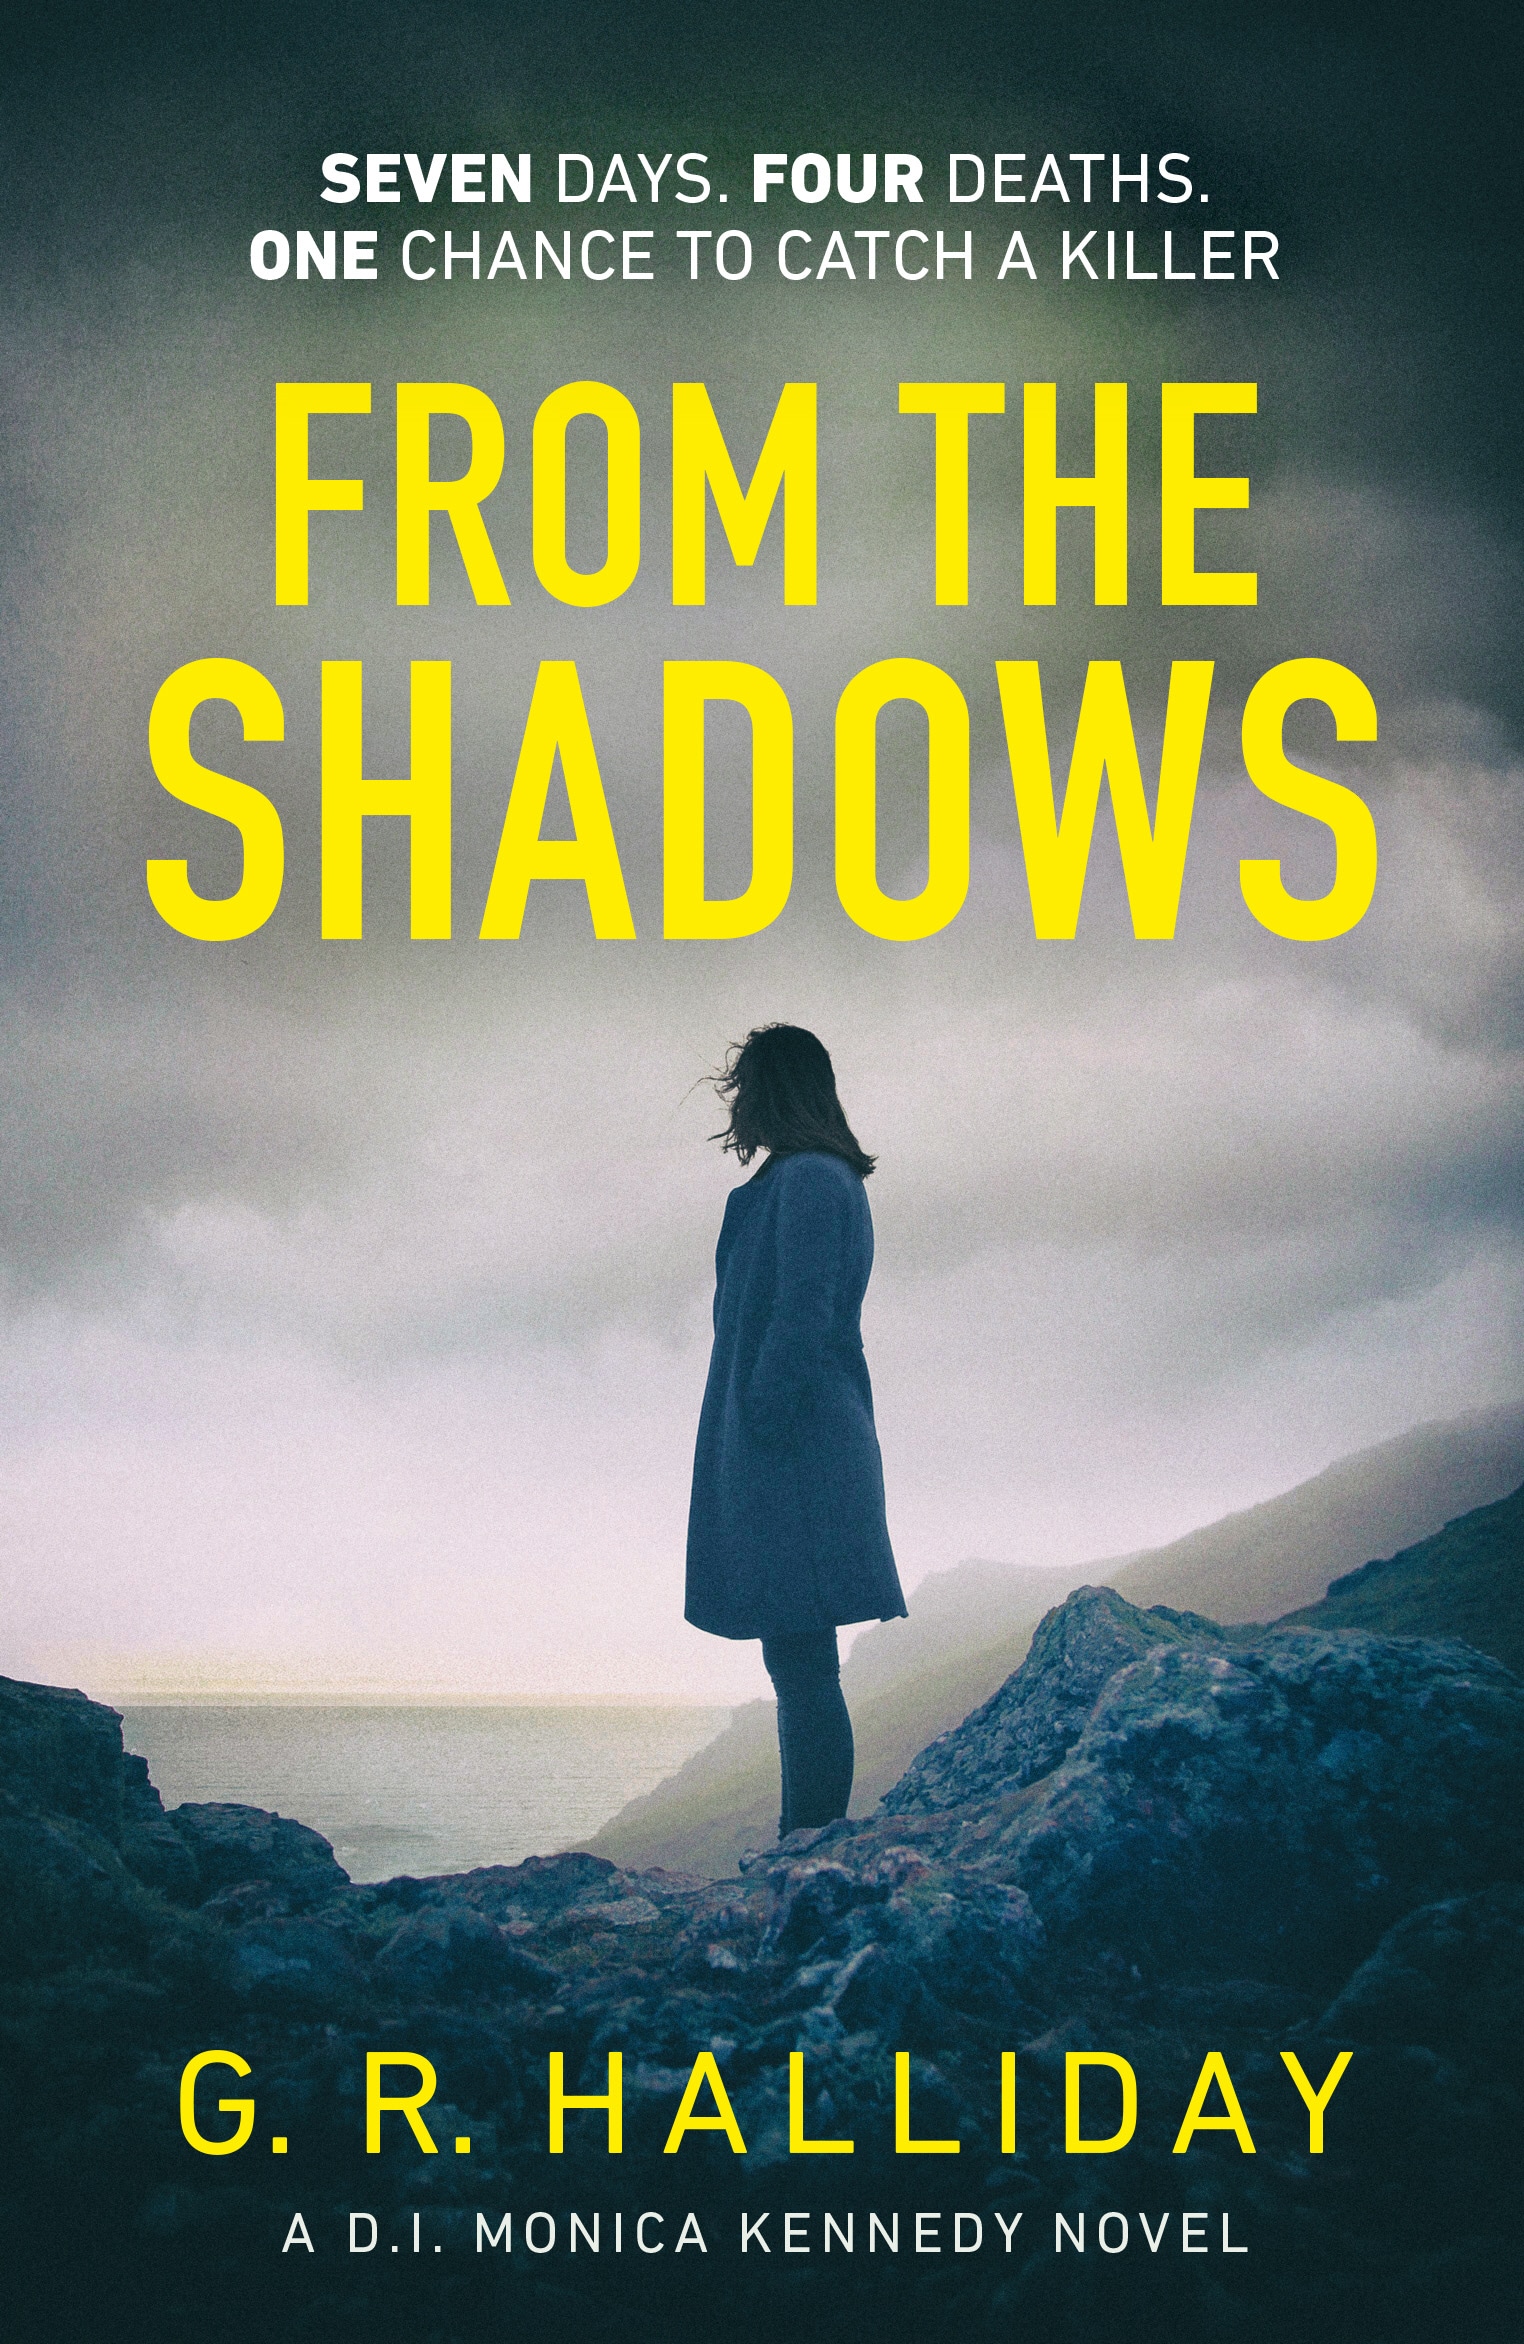 Book “From the Shadows” by G. R. Halliday — February 20, 2020